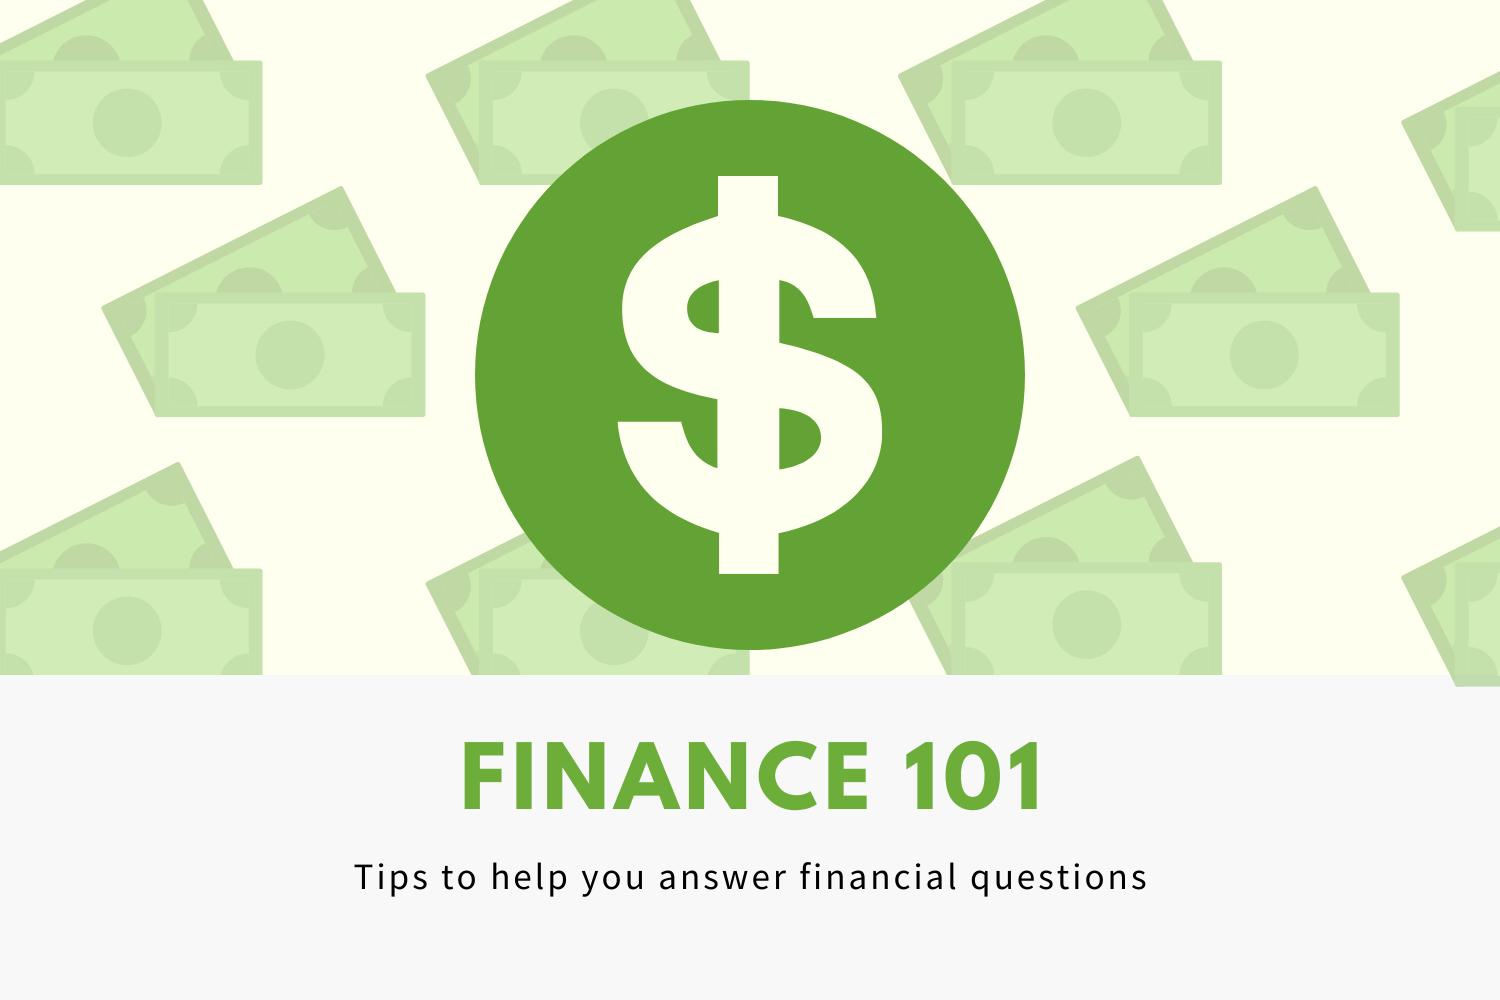 Finances 101: Tips to answer financial question